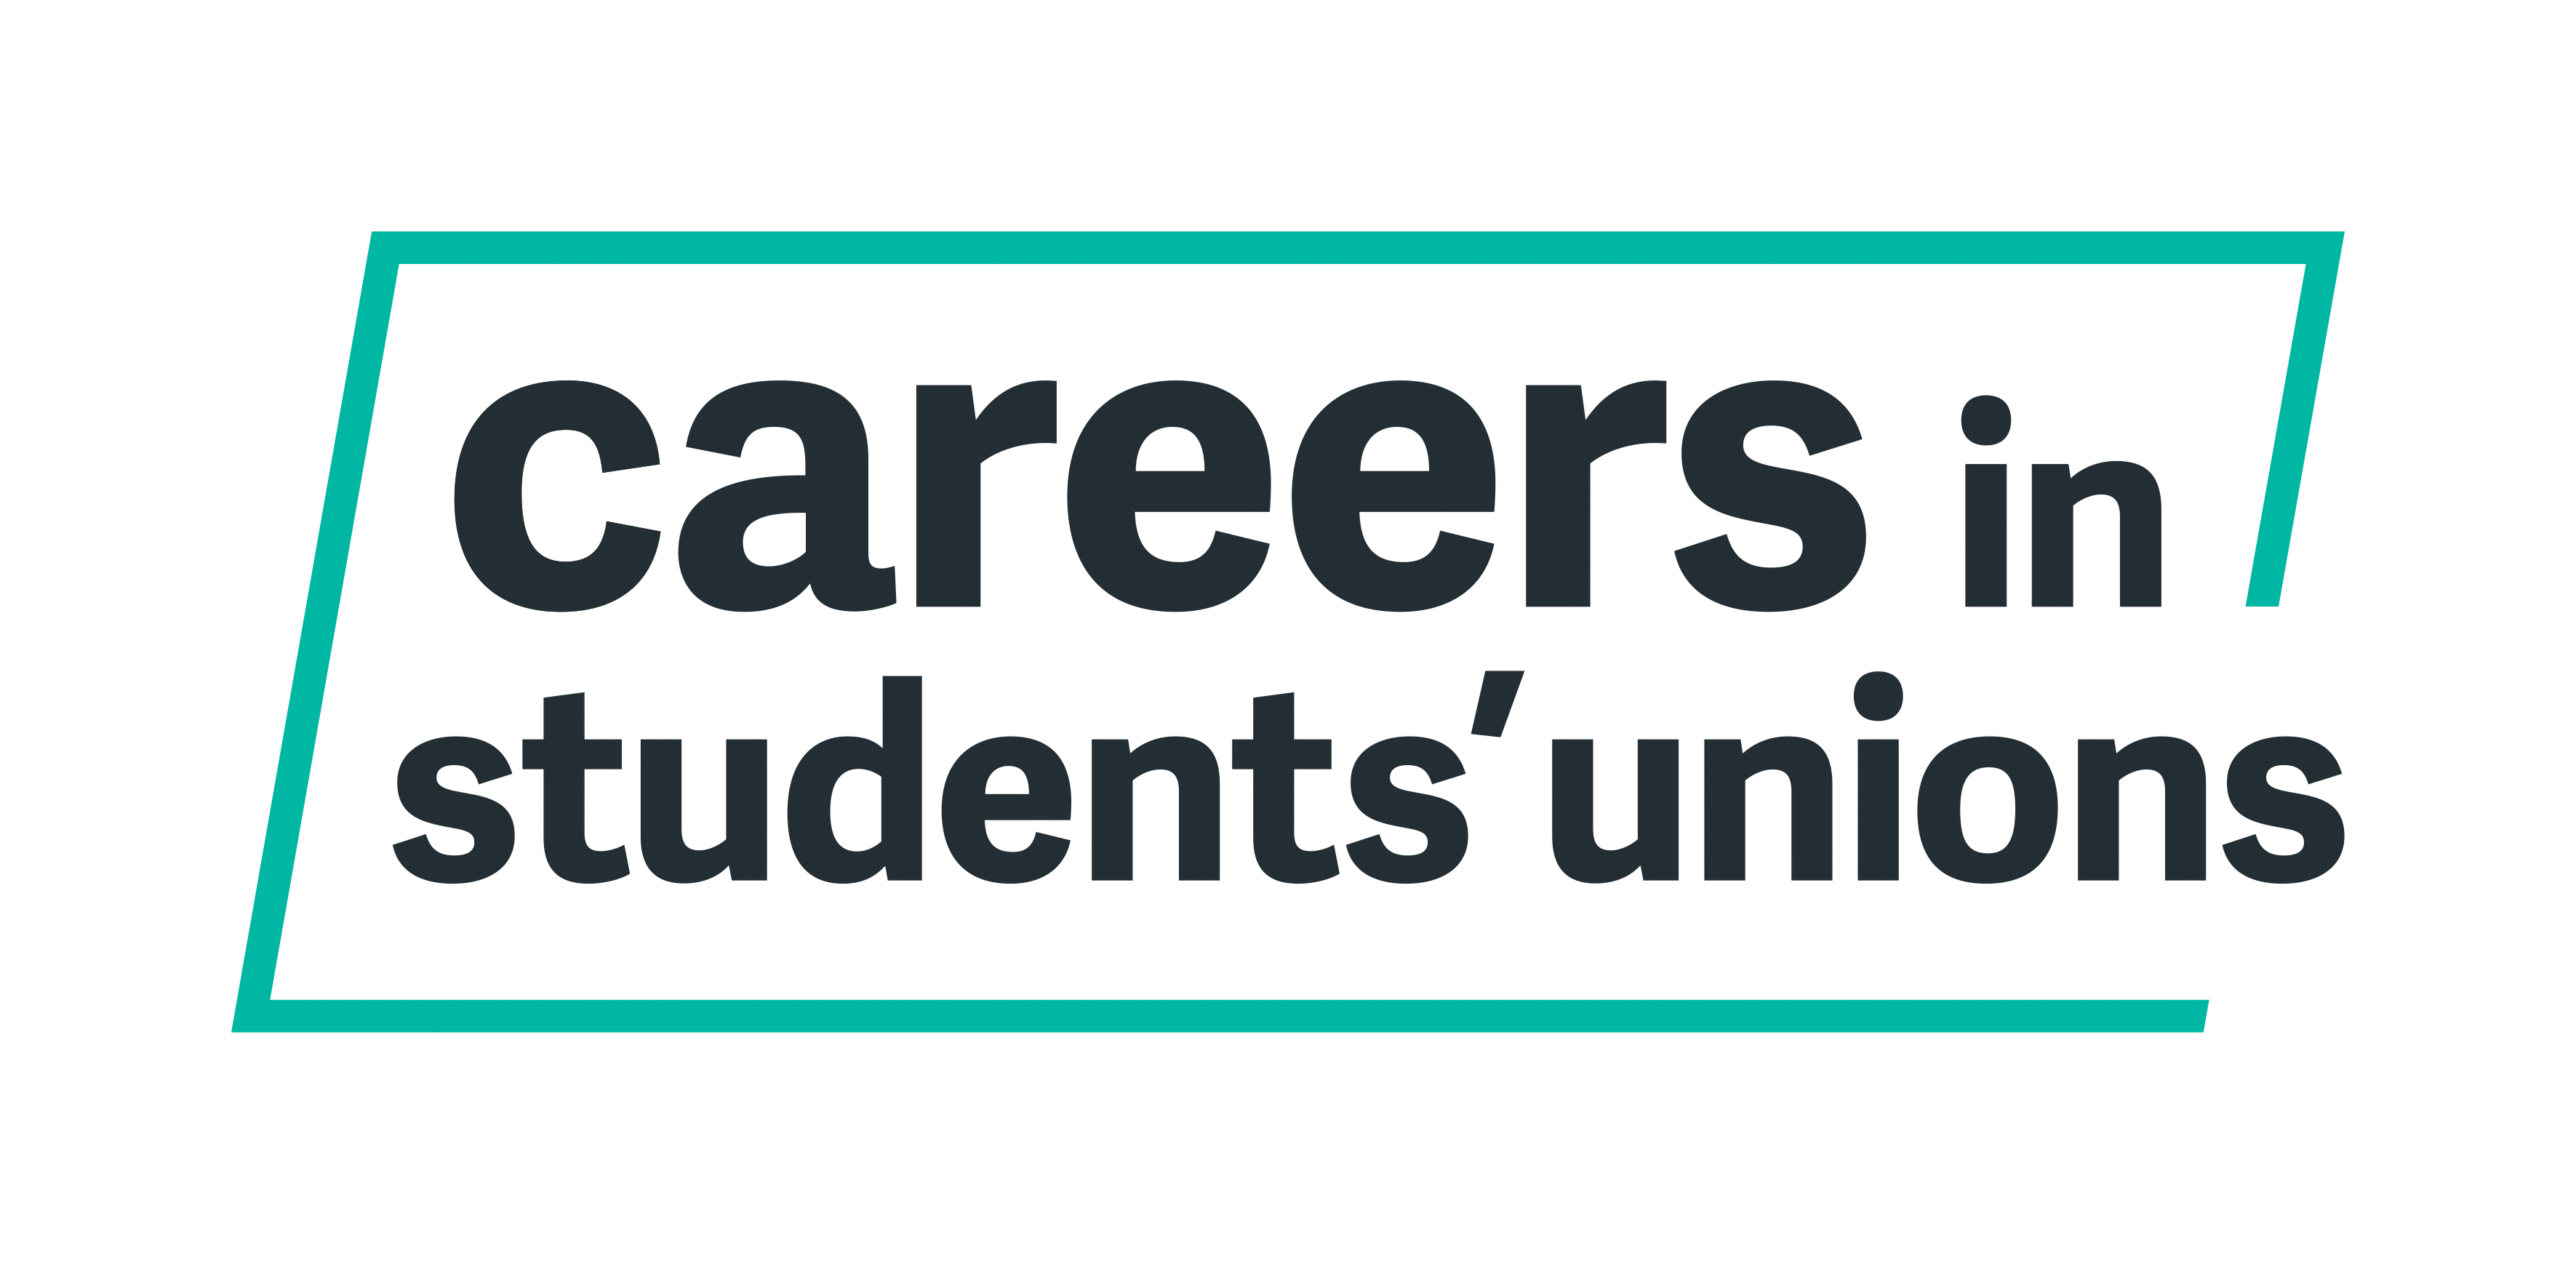 Careers in students unions